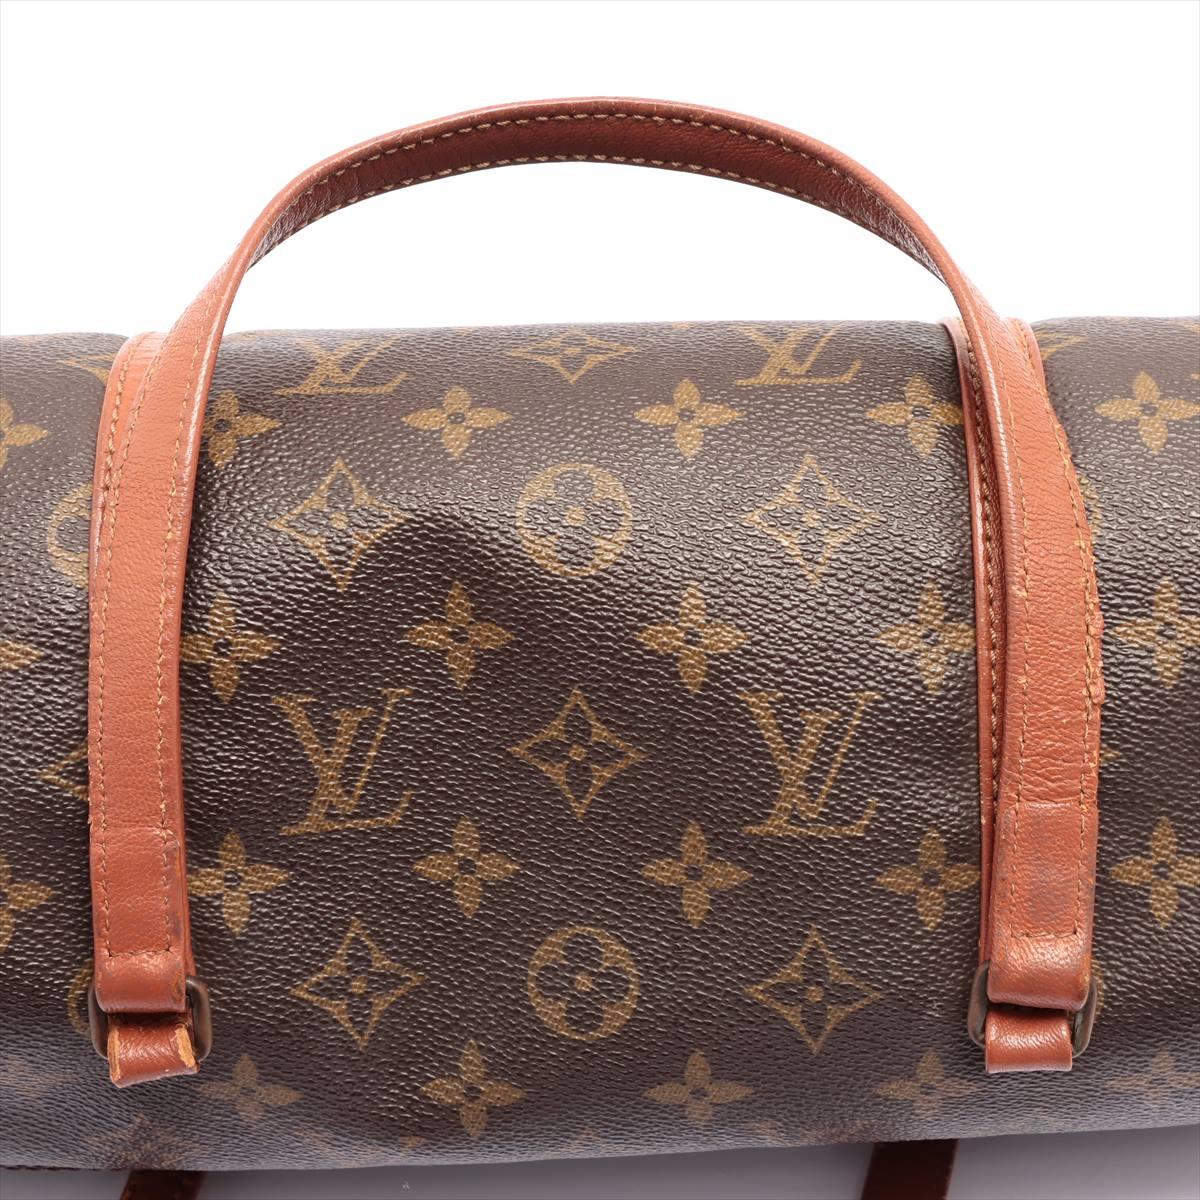 Brown and tan monogram coated canvas Louis Vuitton Papillon 30 cm with gold-tone For Sale 5